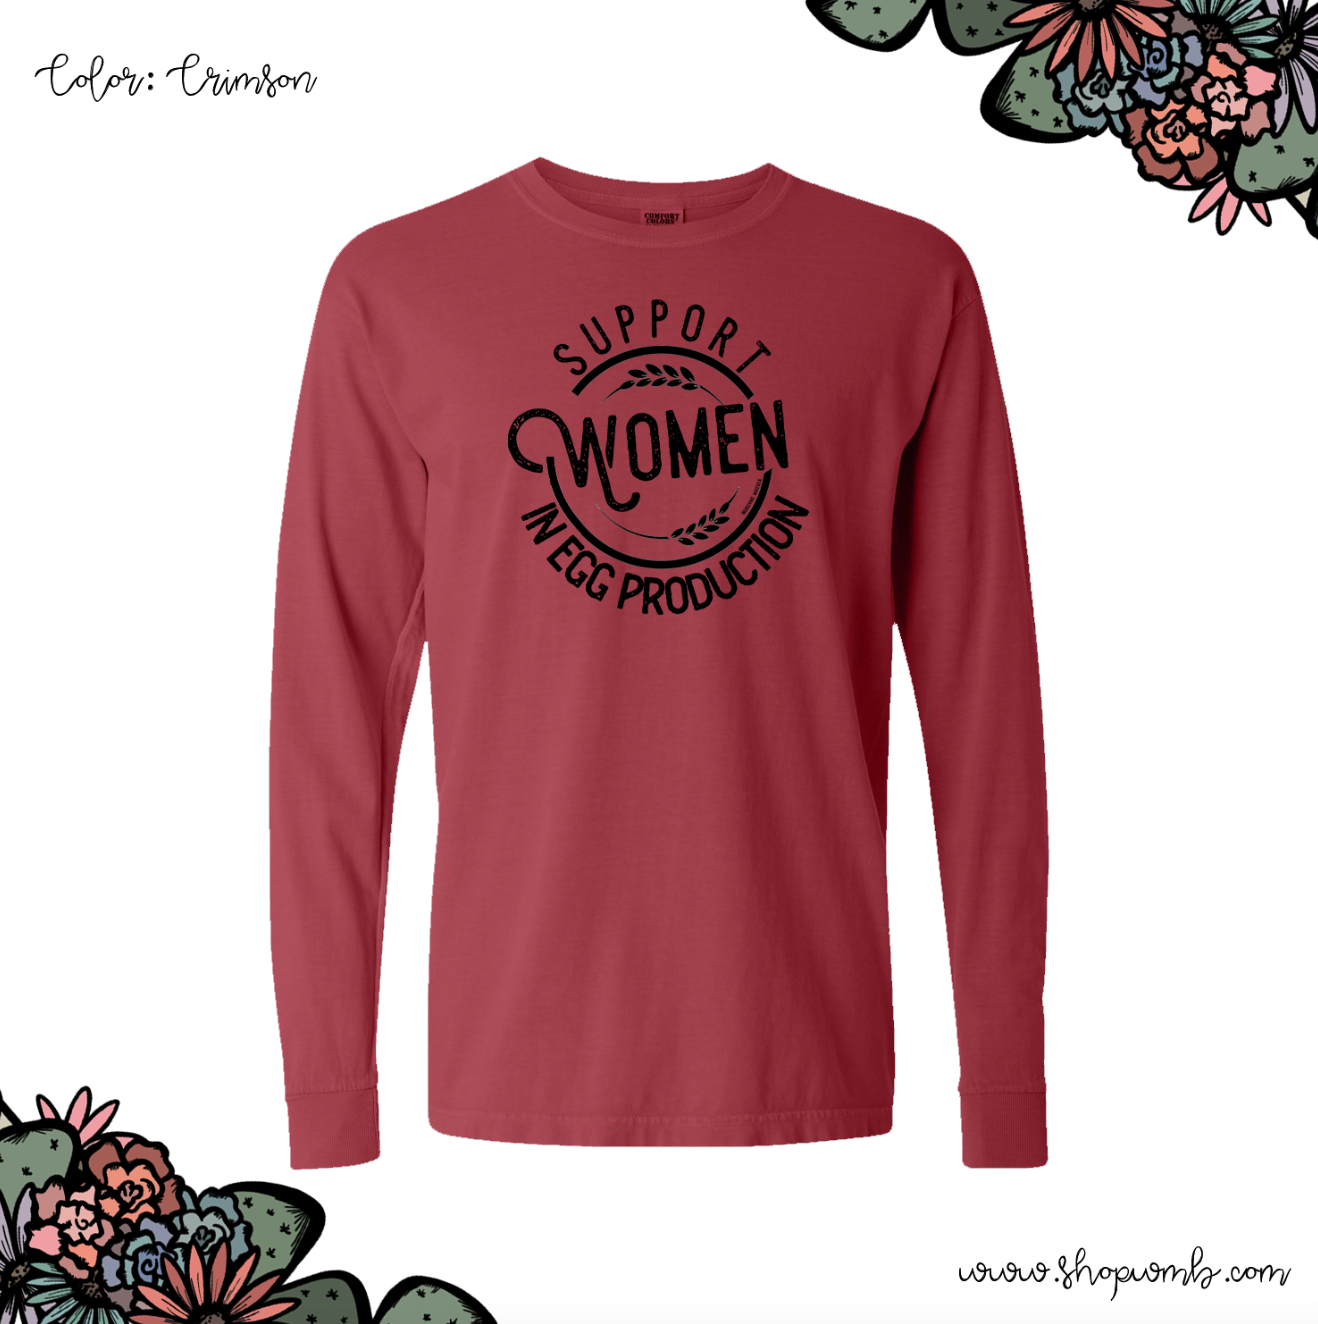 Support Women In Egg Production  LONG SLEEVE T-Shirt (S-3XL) - Multiple Colors!